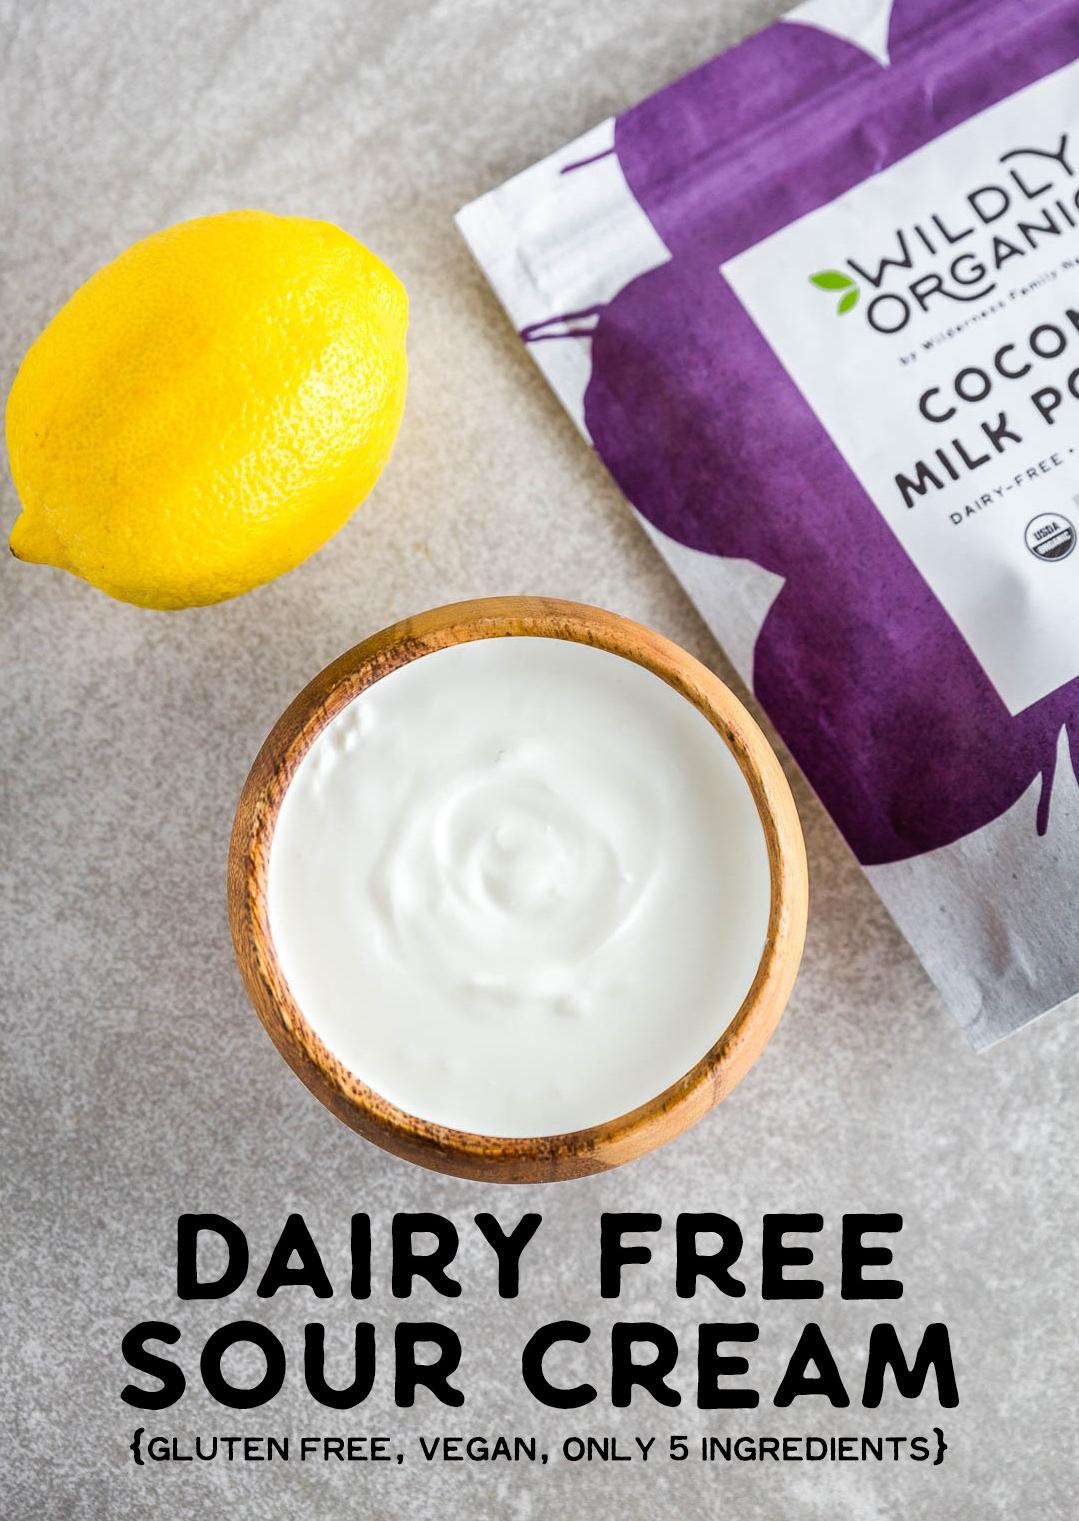  Whether you're dairy-free or not, this recipe is worth a try.